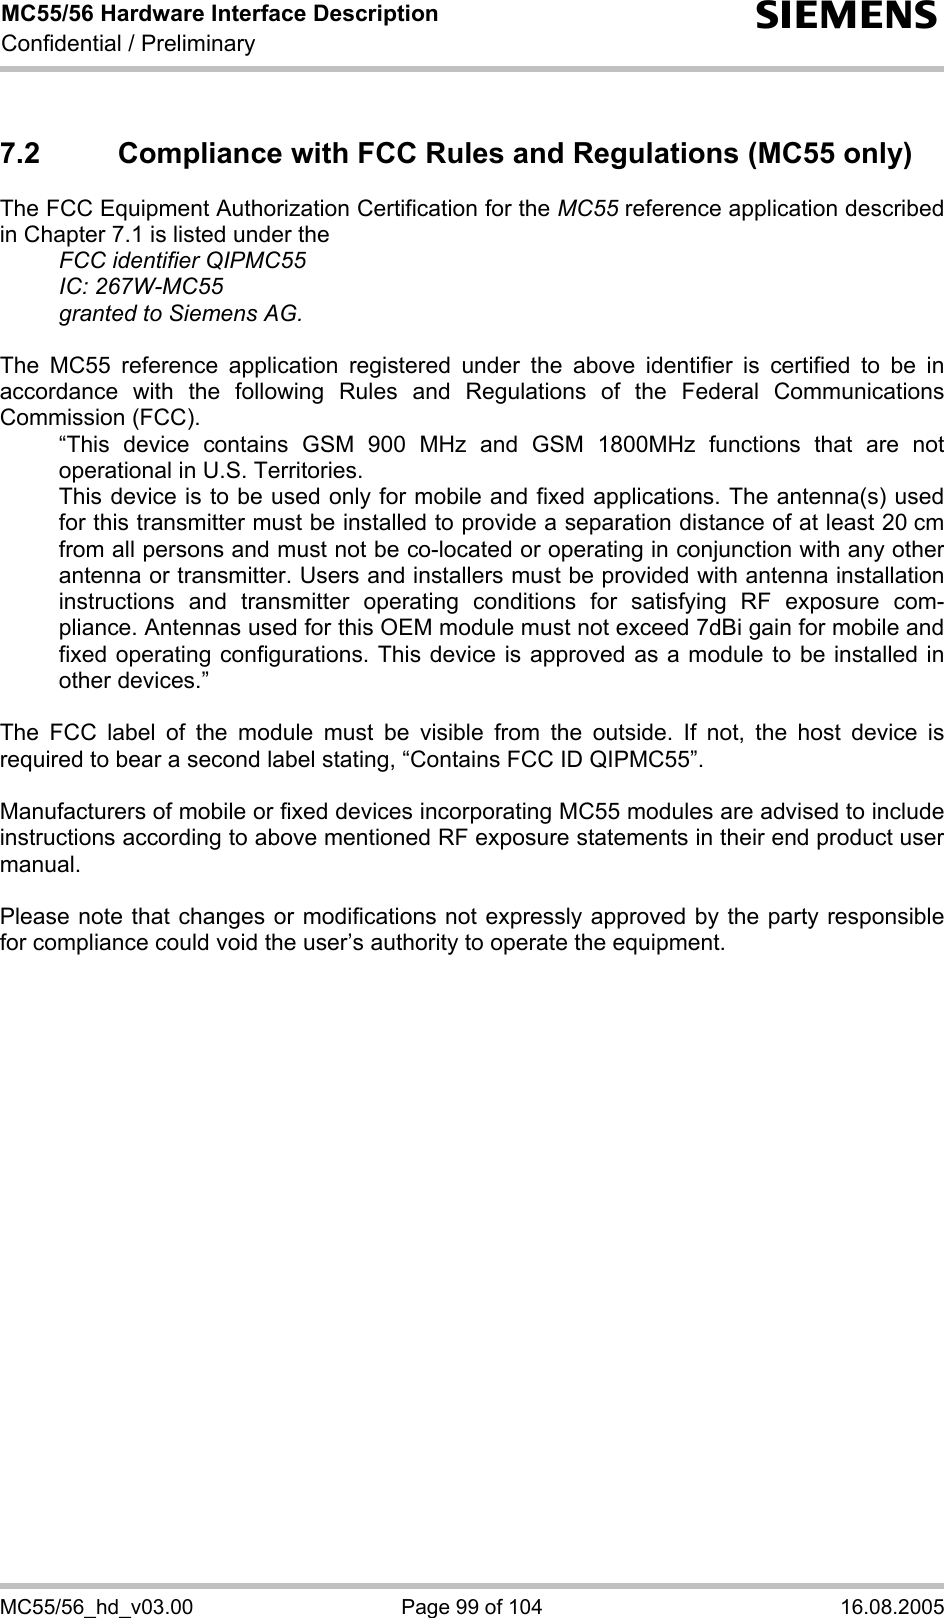 MC55/56 Hardware Interface Description Confidential / Preliminary s MC55/56_hd_v03.00  Page 99 of 104  16.08.2005 7.2  Compliance with FCC Rules and Regulations (MC55 only) The FCC Equipment Authorization Certification for the MC55 reference application described in Chapter 7.1 is listed under the   FCC identifier QIPMC55  IC: 267W-MC55   granted to Siemens AG.   The MC55 reference application registered under the above identifier is certified to be in accordance with the following Rules and Regulations of the Federal Communications Commission (FCC).    “This device contains GSM 900 MHz and GSM 1800MHz functions that are not operational in U.S. Territories.    This device is to be used only for mobile and fixed applications. The antenna(s) used for this transmitter must be installed to provide a separation distance of at least 20 cm from all persons and must not be co-located or operating in conjunction with any other antenna or transmitter. Users and installers must be provided with antenna installation instructions and transmitter operating conditions for satisfying RF exposure com-pliance. Antennas used for this OEM module must not exceed 7dBi gain for mobile and fixed operating configurations. This device is approved as a module to be installed in other devices.”  The FCC label of the module must be visible from the outside. If not, the host device is required to bear a second label stating, “Contains FCC ID QIPMC55”.  Manufacturers of mobile or fixed devices incorporating MC55 modules are advised to include instructions according to above mentioned RF exposure statements in their end product user manual.   Please note that changes or modifications not expressly approved by the party responsible for compliance could void the user’s authority to operate the equipment.   